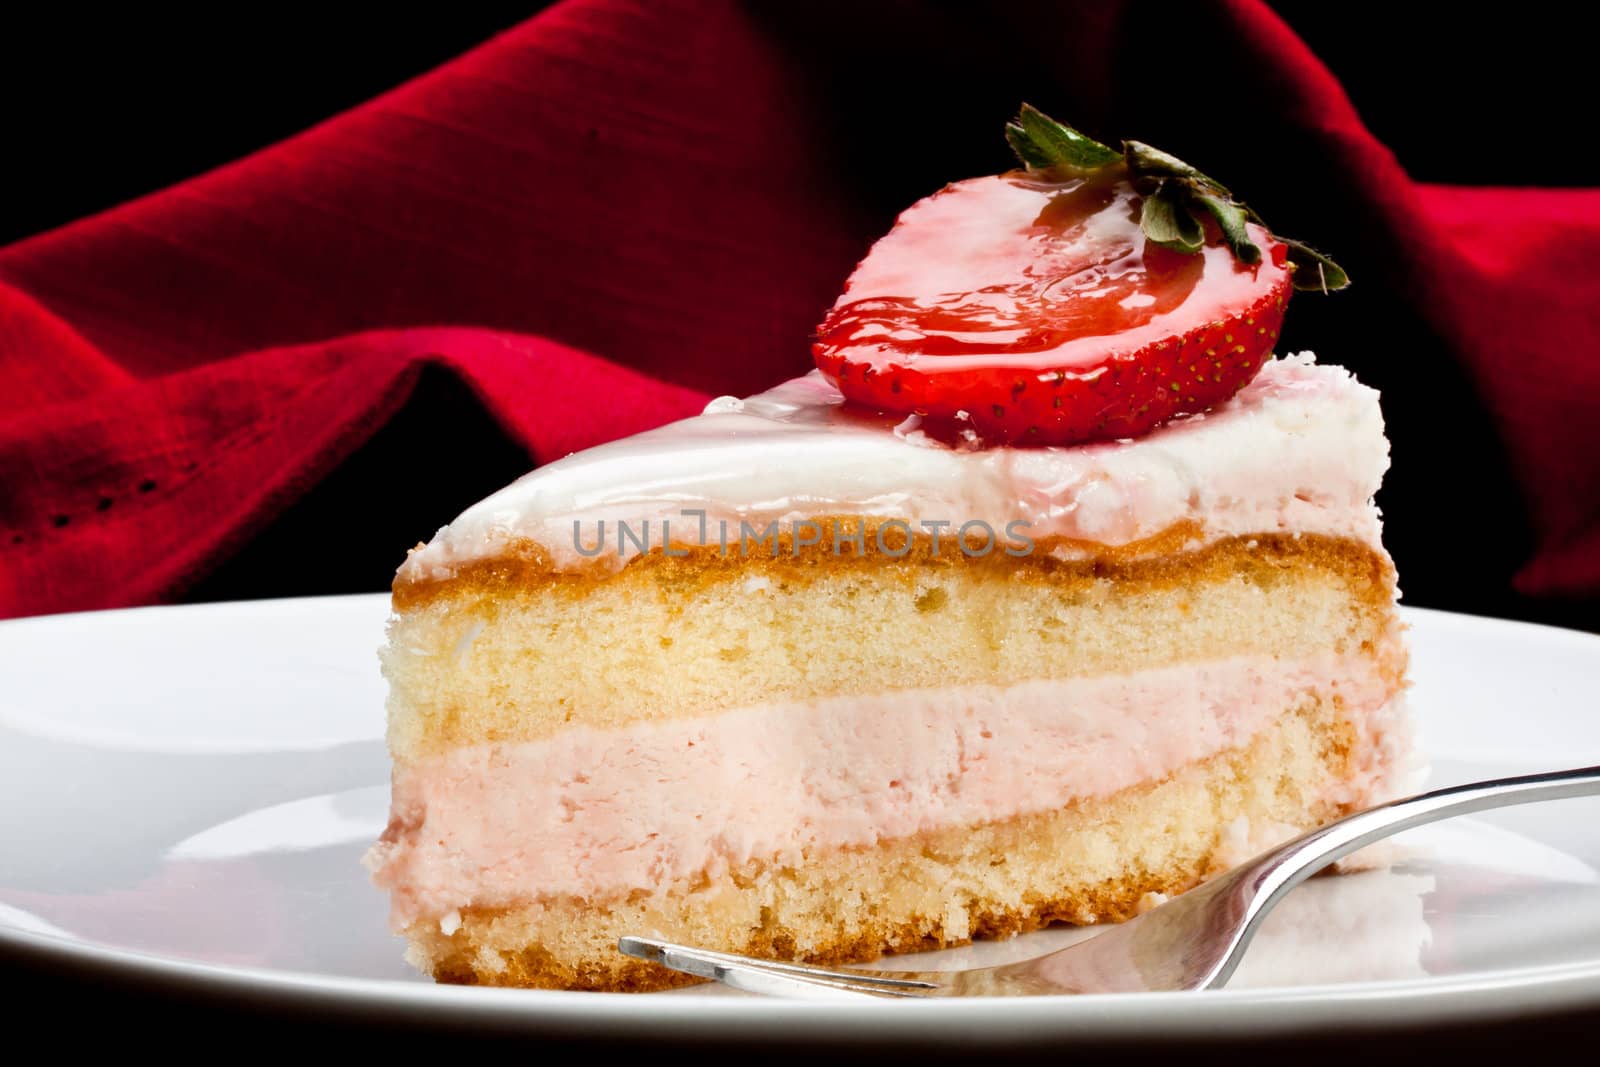 strawberry mousse by maxg71